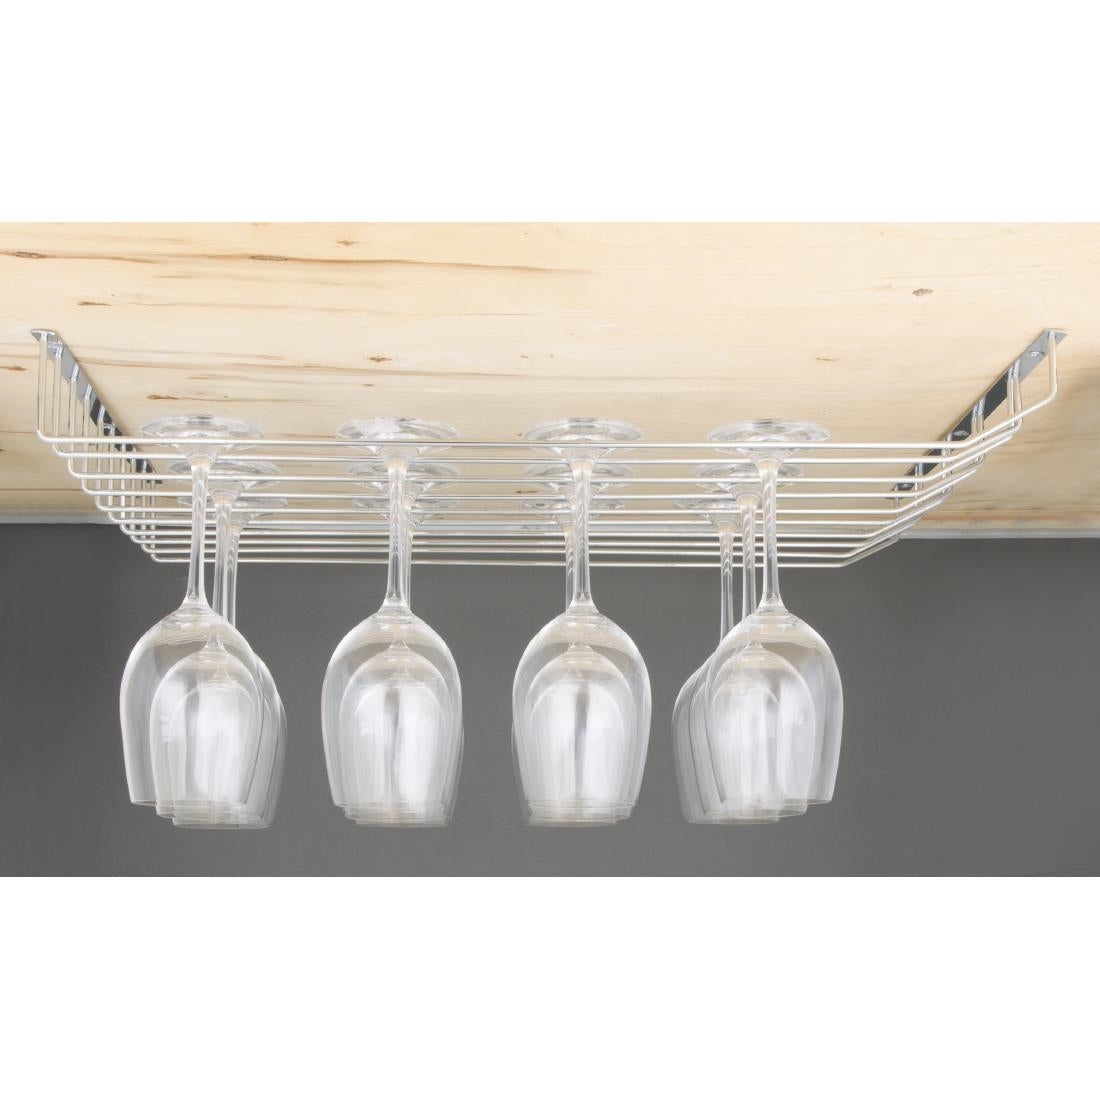 GH057 Olympia Wine Glass Rack JD Catering Equipment Solutions Ltd